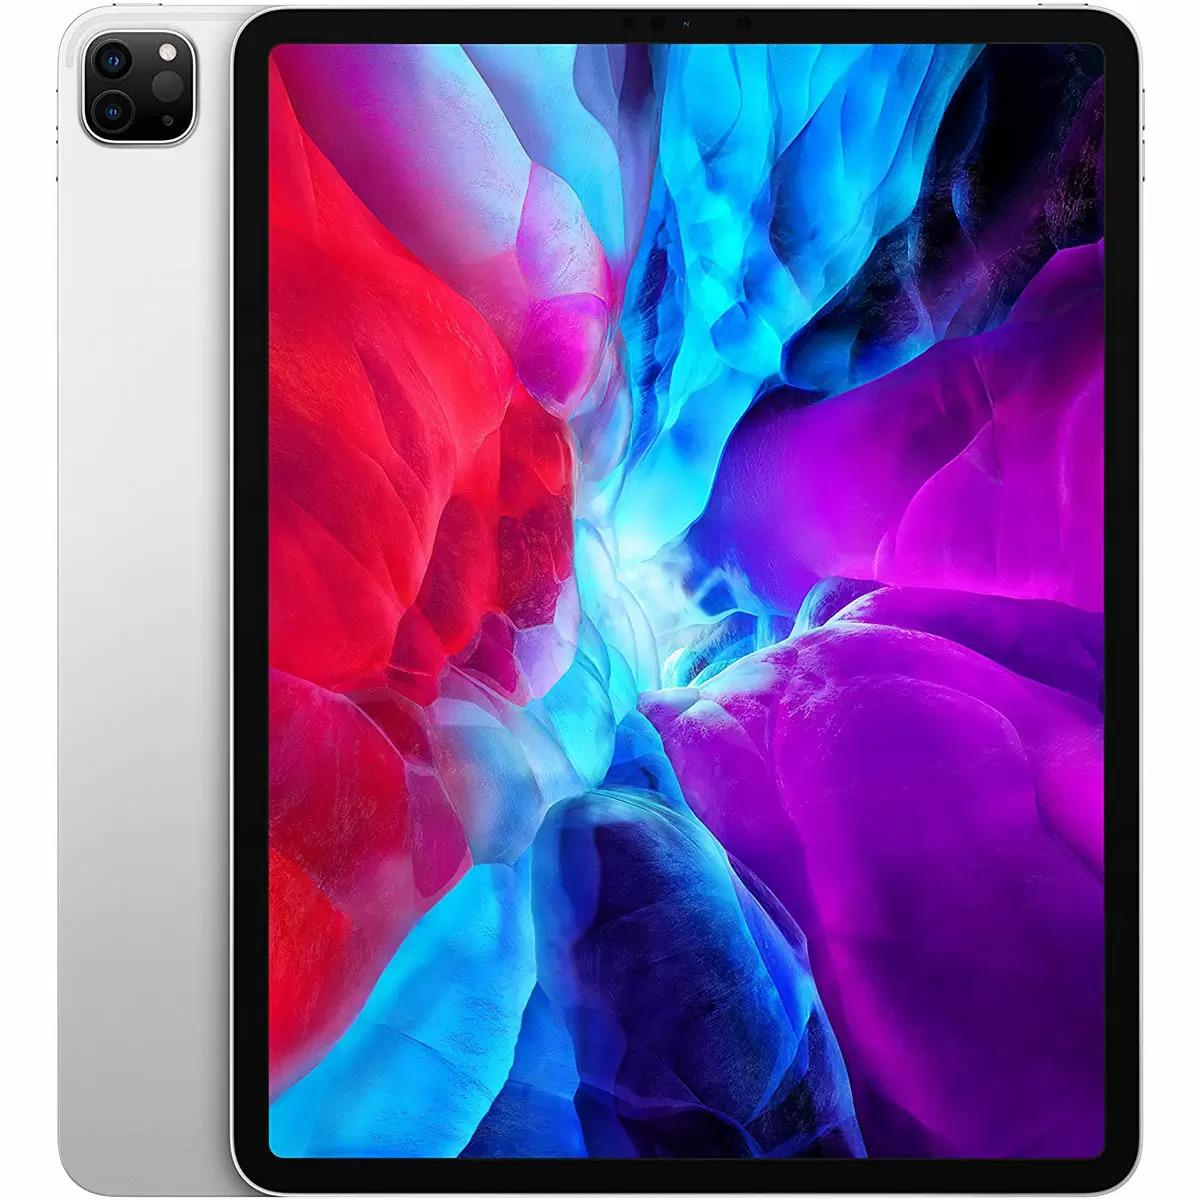 Apple iPad Pro 12.9" 128GB Wi-Fi Tablet for $799.99 Shipped